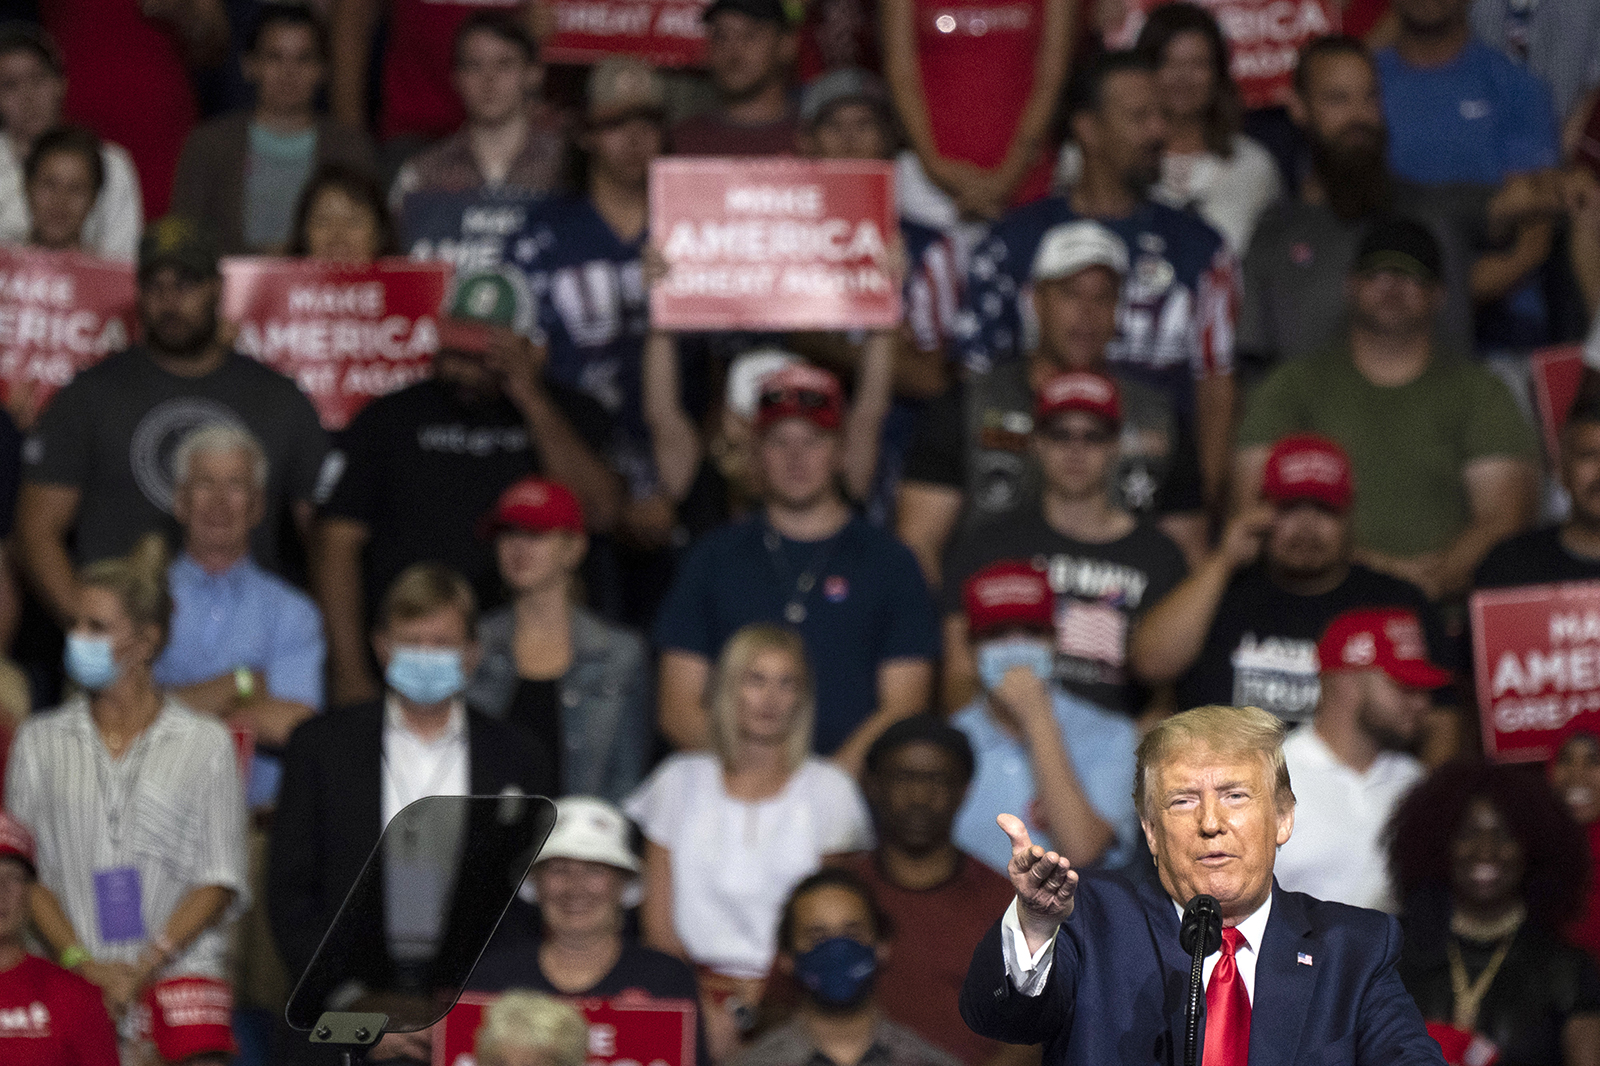 President Donald Trump speaks during a rally in Tulsa, Oklahoma on June 20.